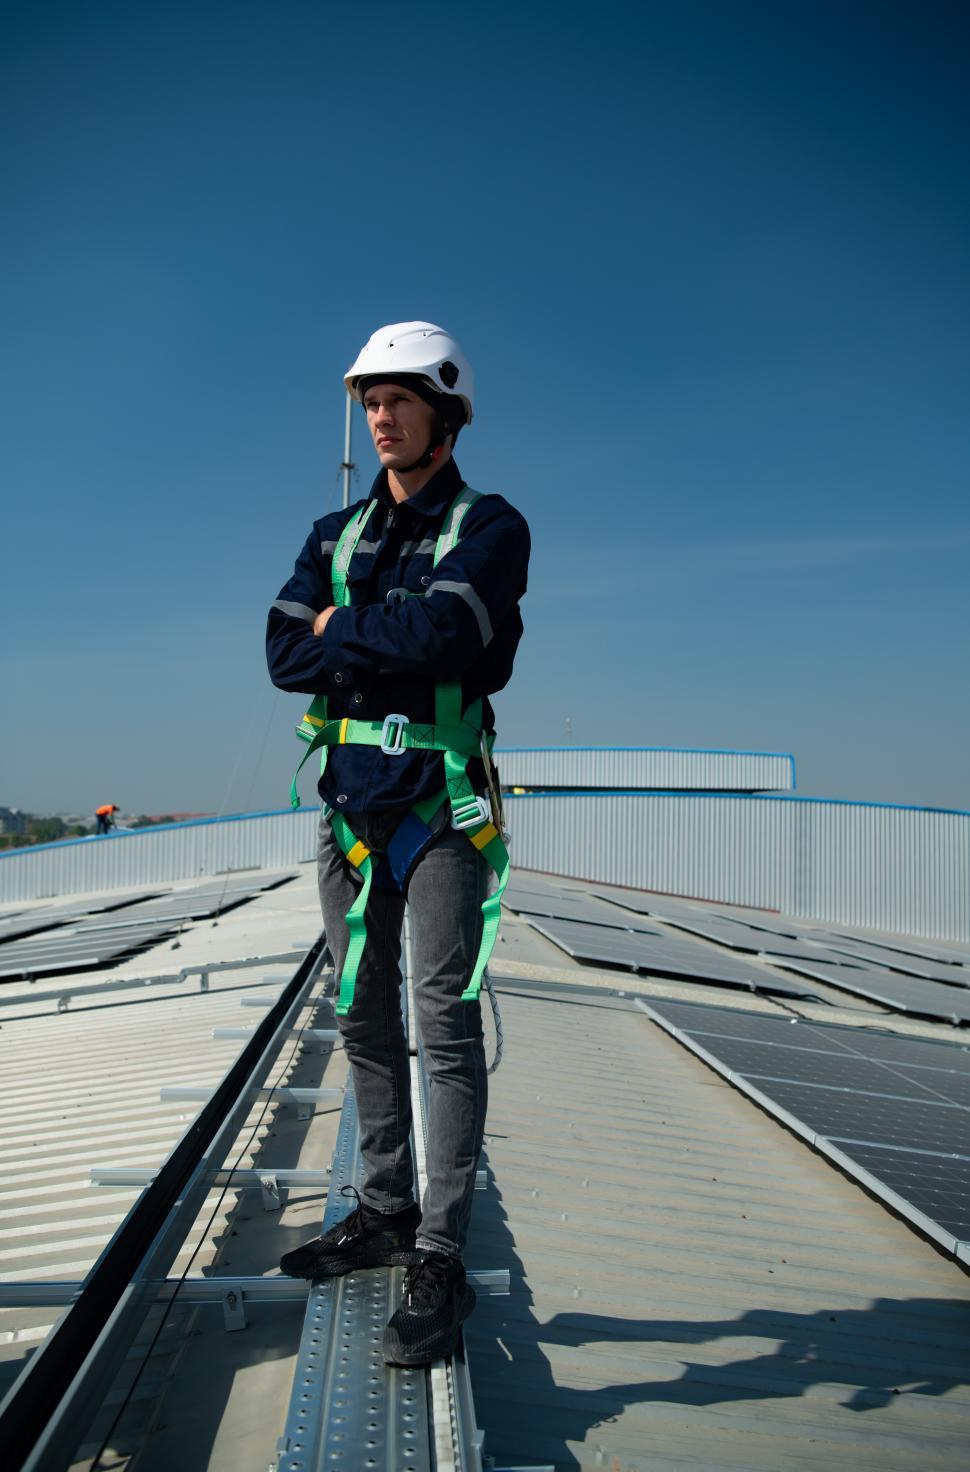 Free Image of Engineer in charge of solar panel installation 